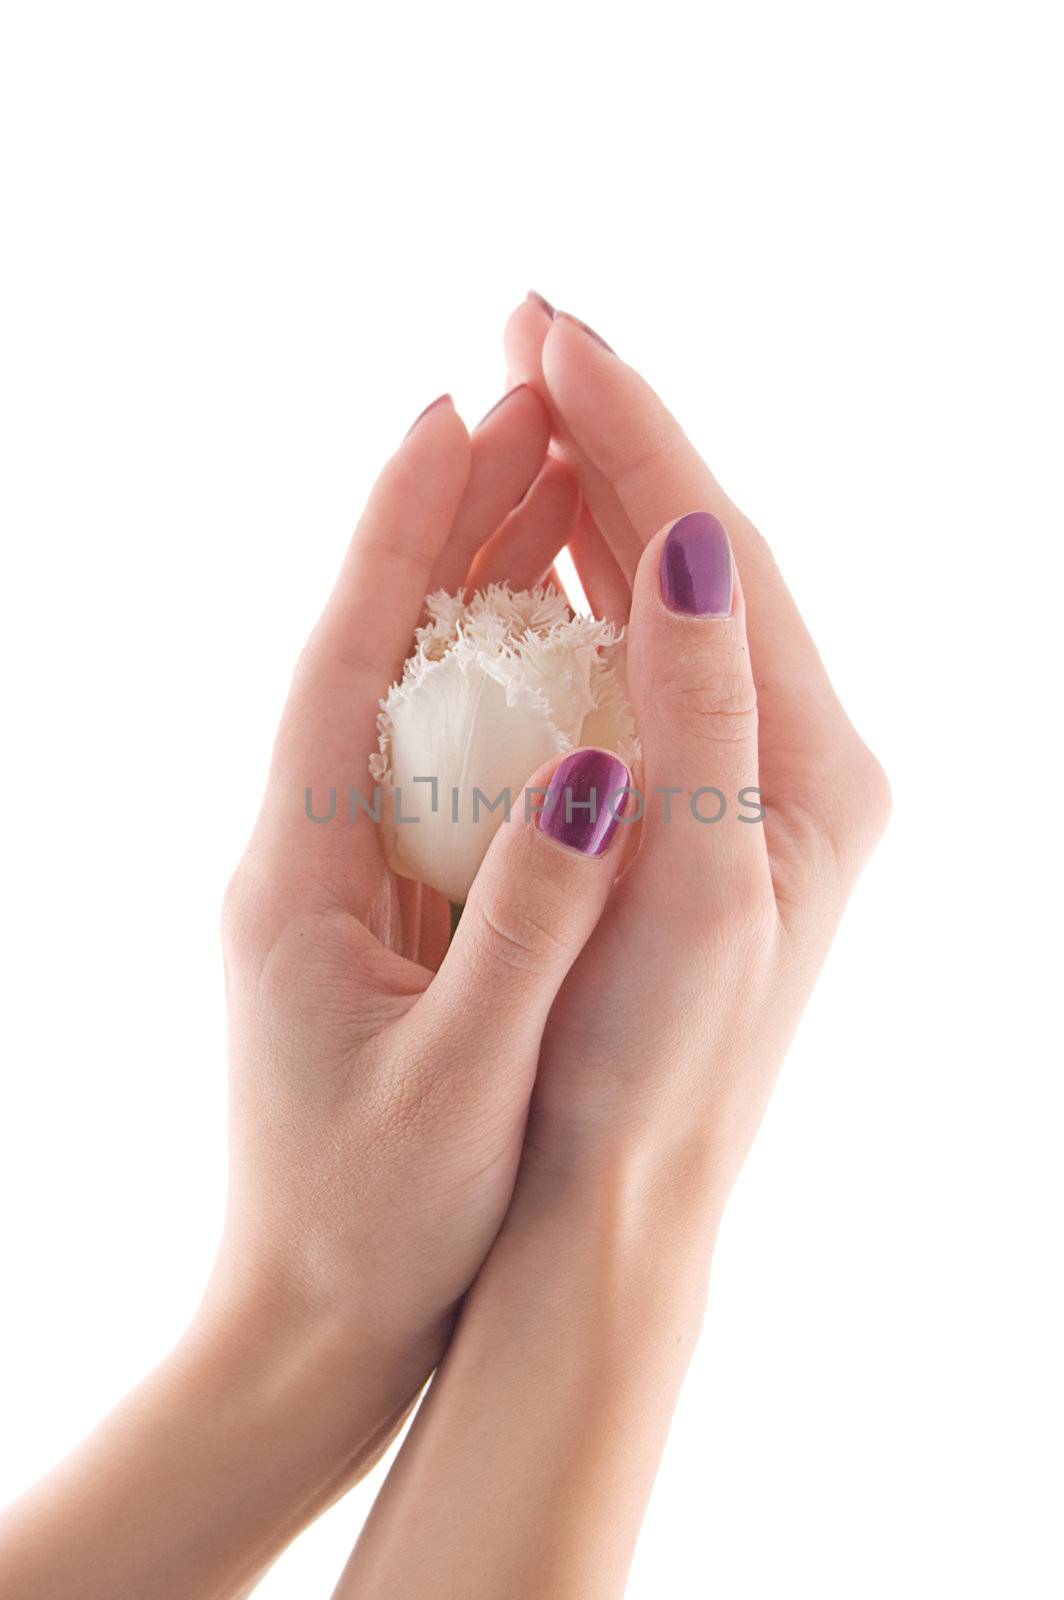 Woman hands with manicure holding tulip on white